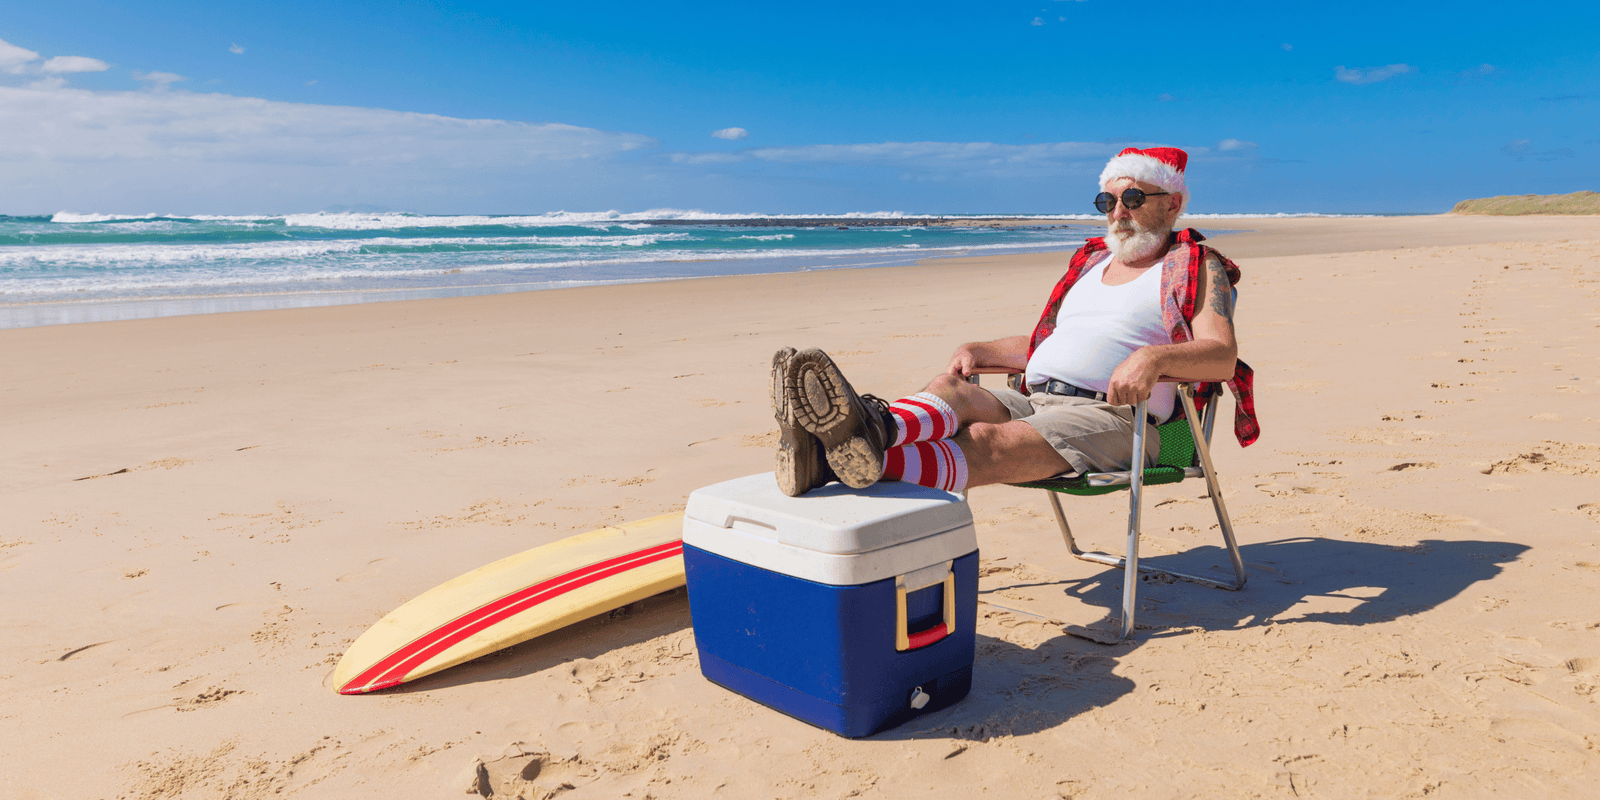 A Ripper Aussie Tradie Christmas: 16 Ideas for This Year's Chrissie Party!